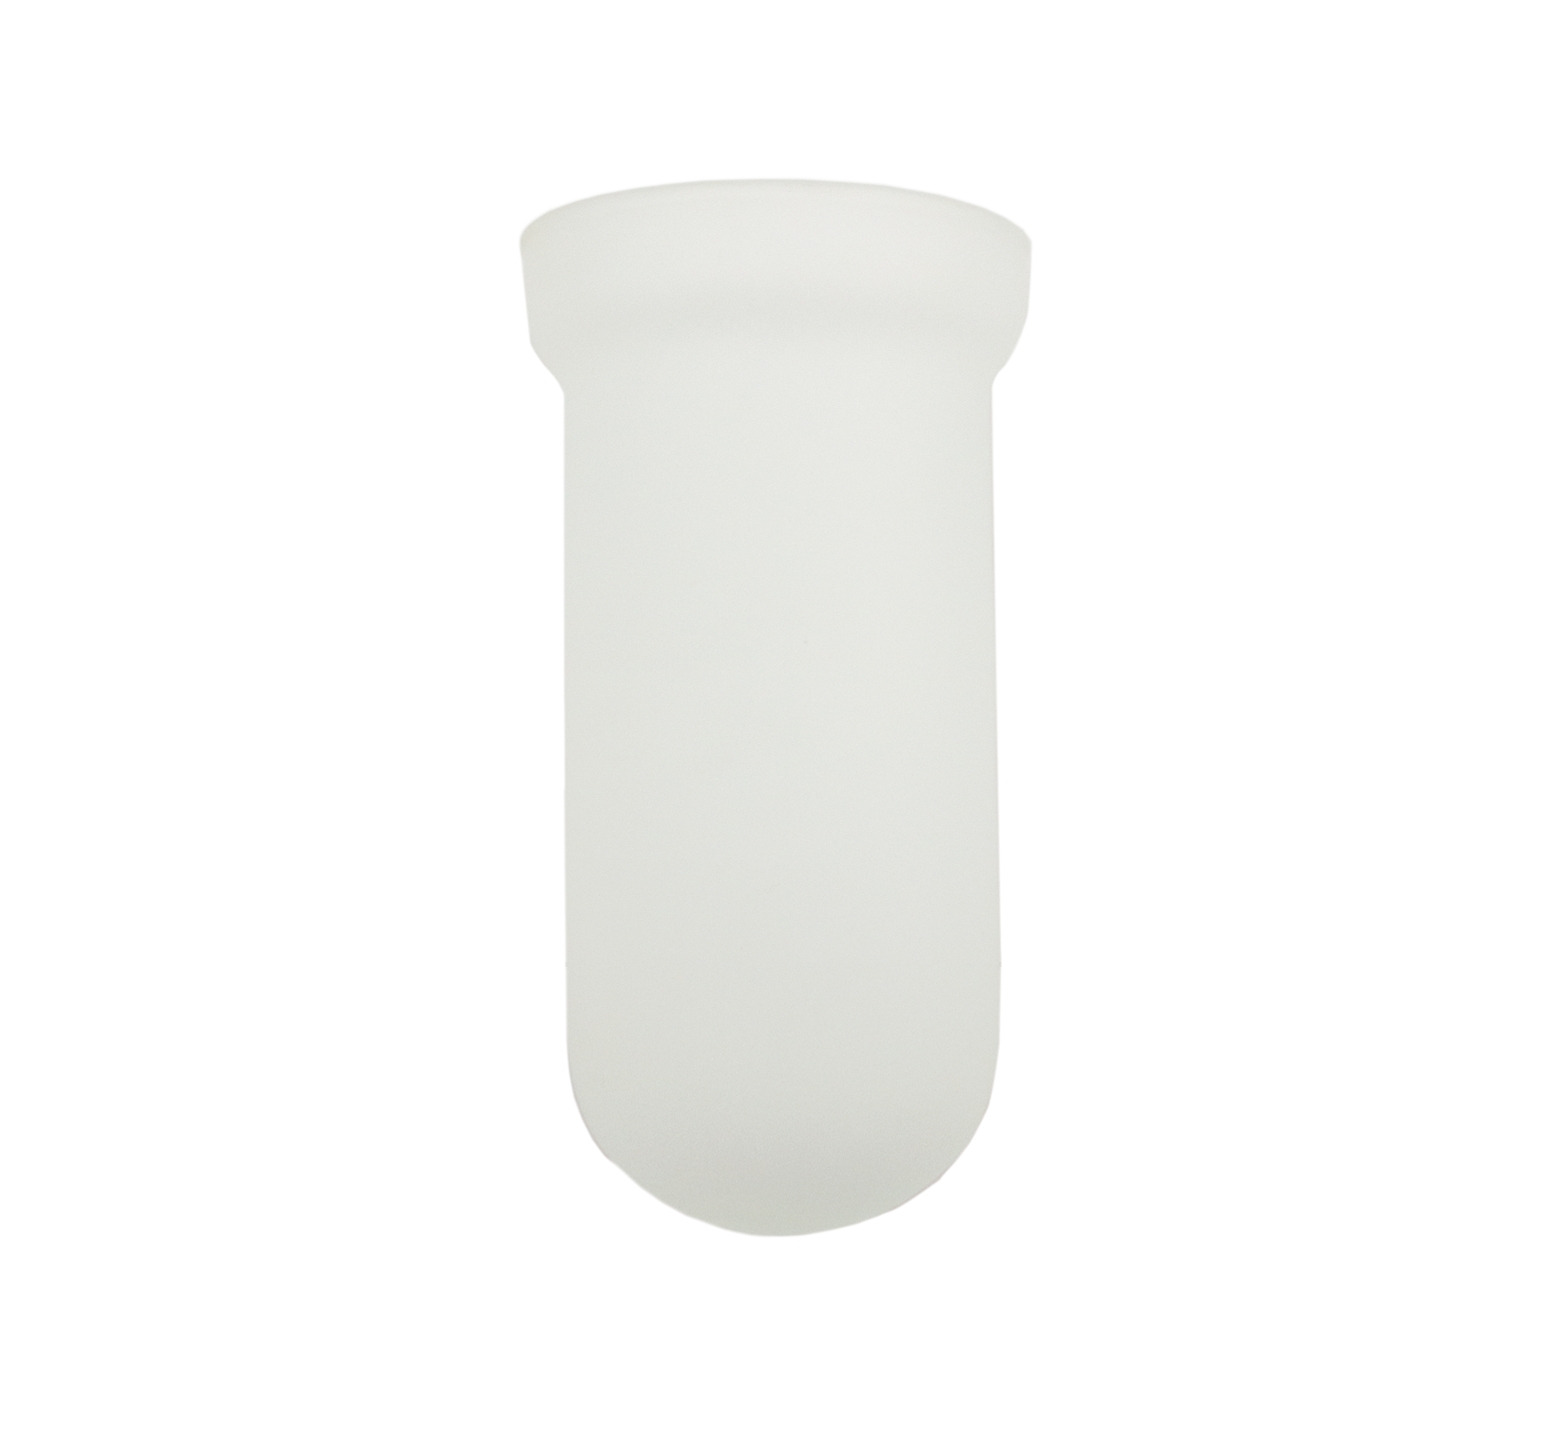 Replacement BIS tube for bathroom purpose in satiated glass